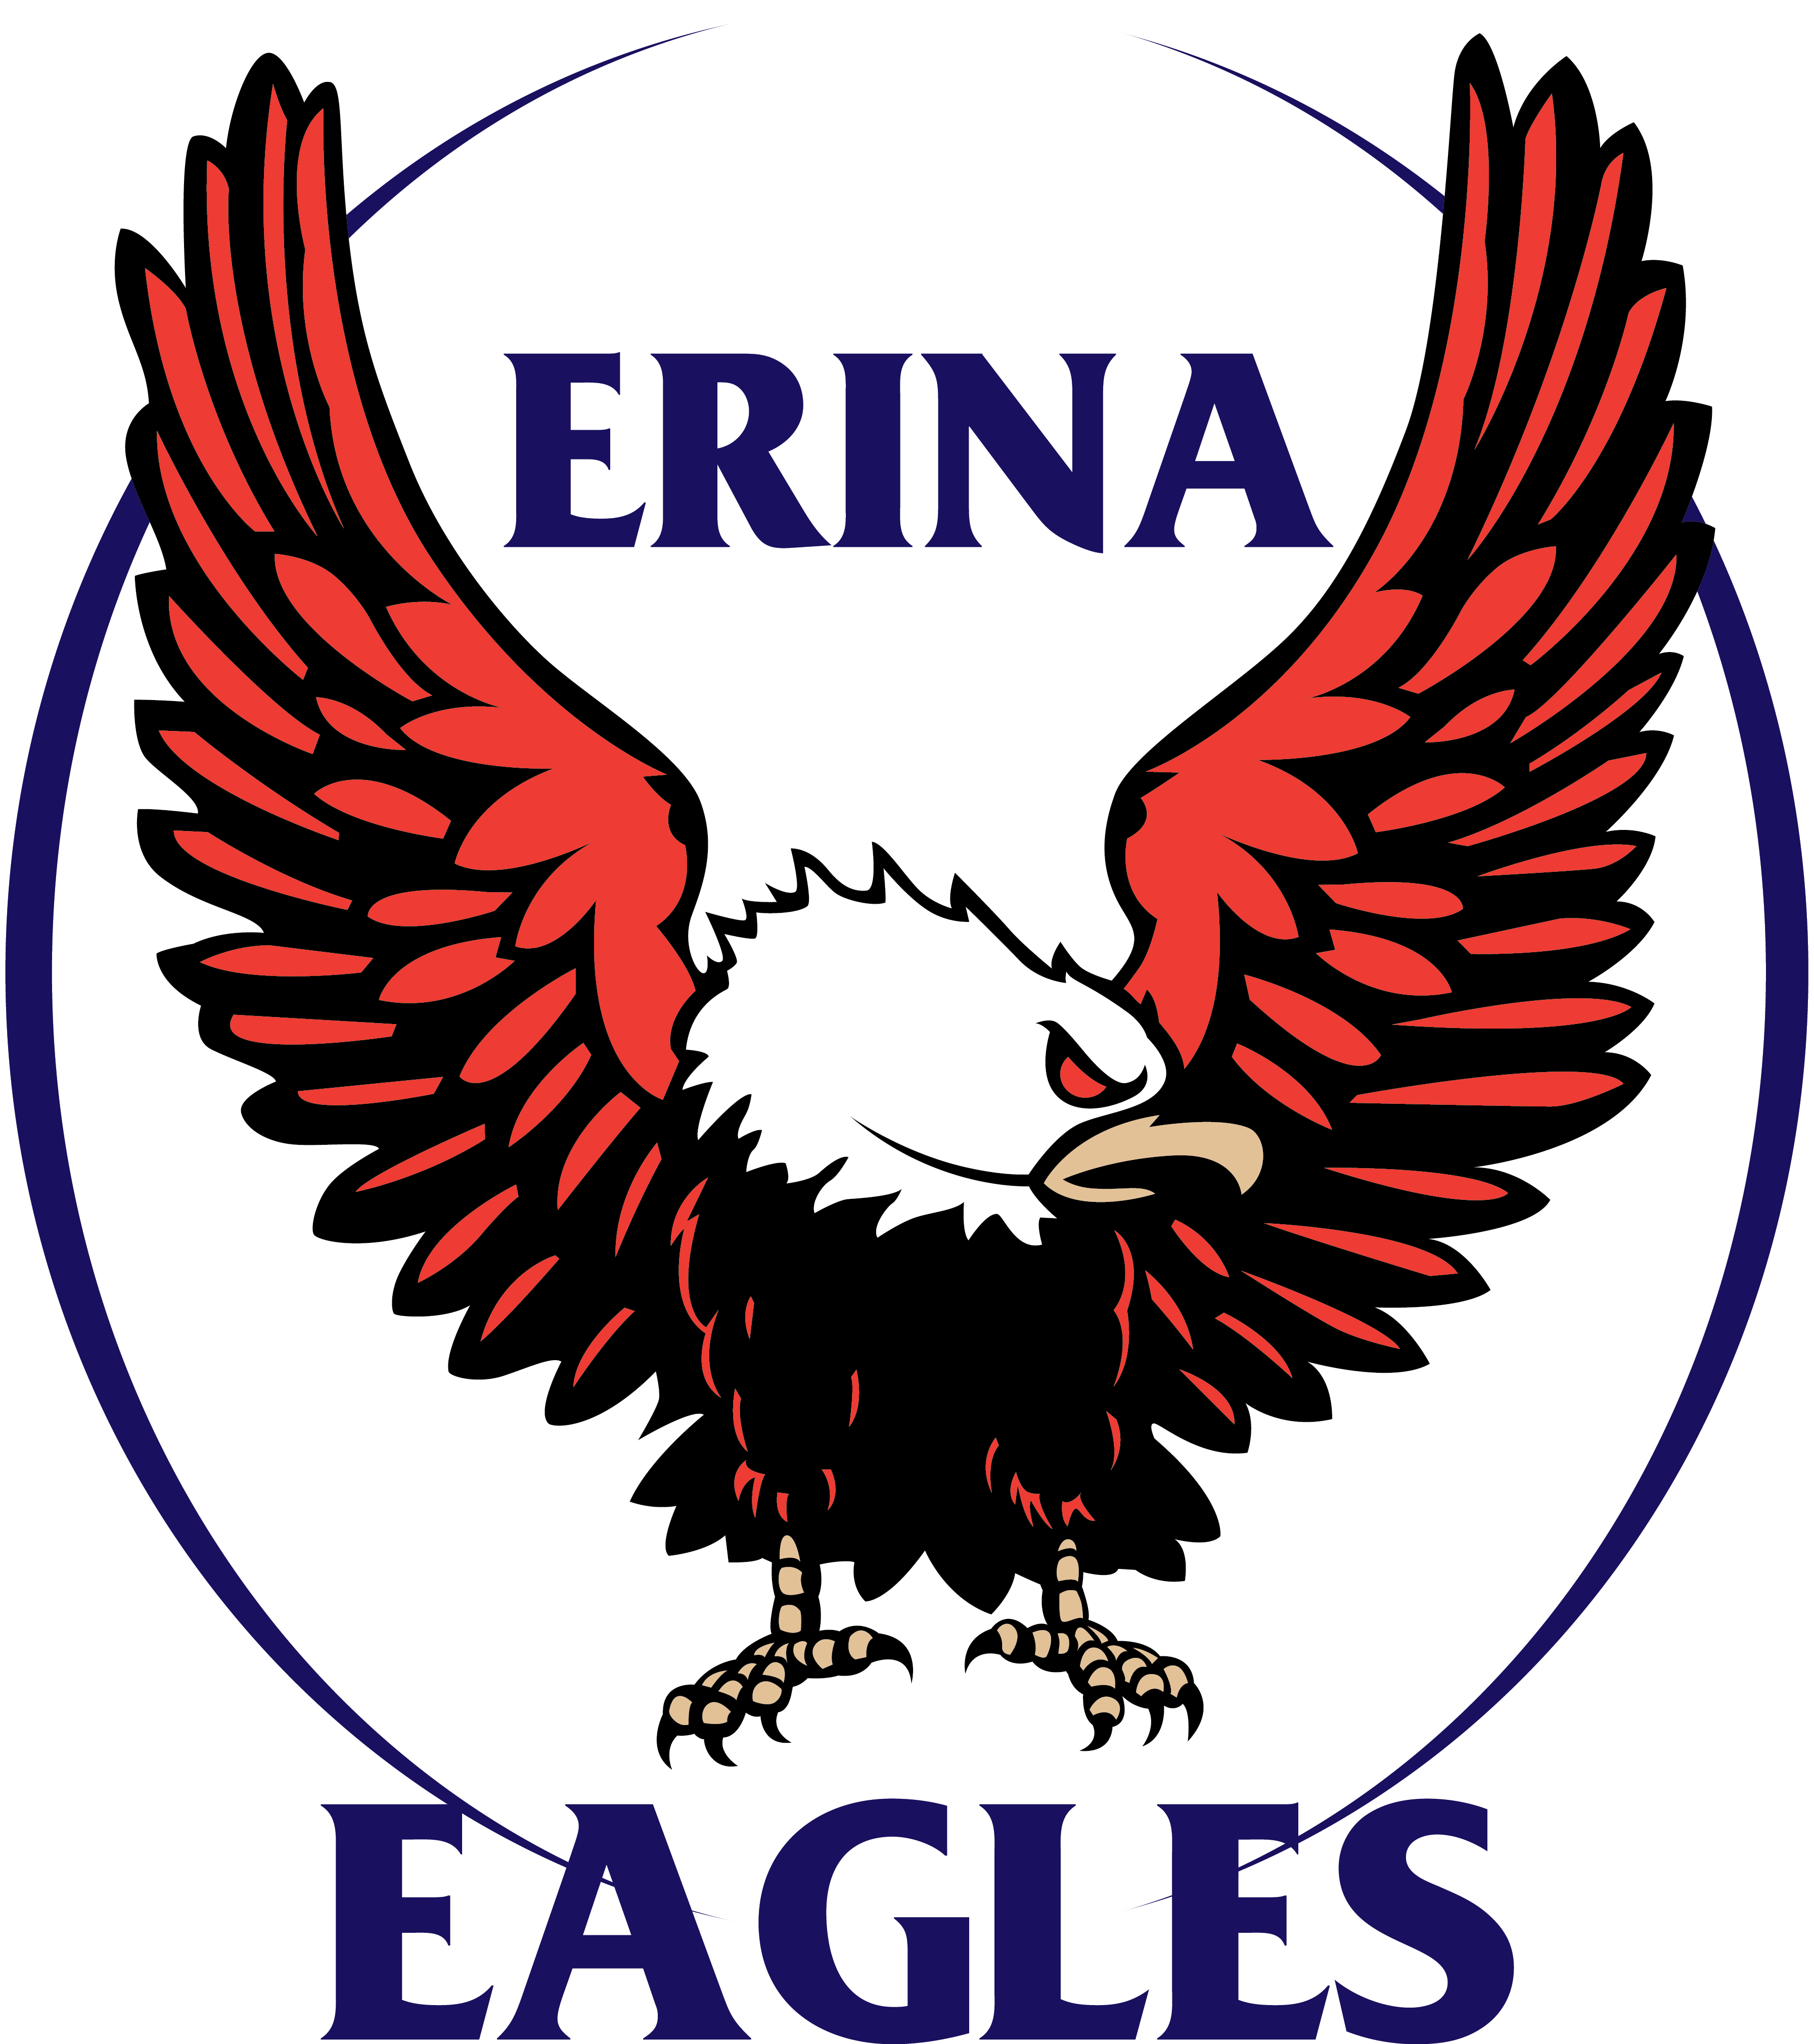 Red White and Blue Eagles Football Logo - Football | Erina Rugby League Football Club | The way a club should be!